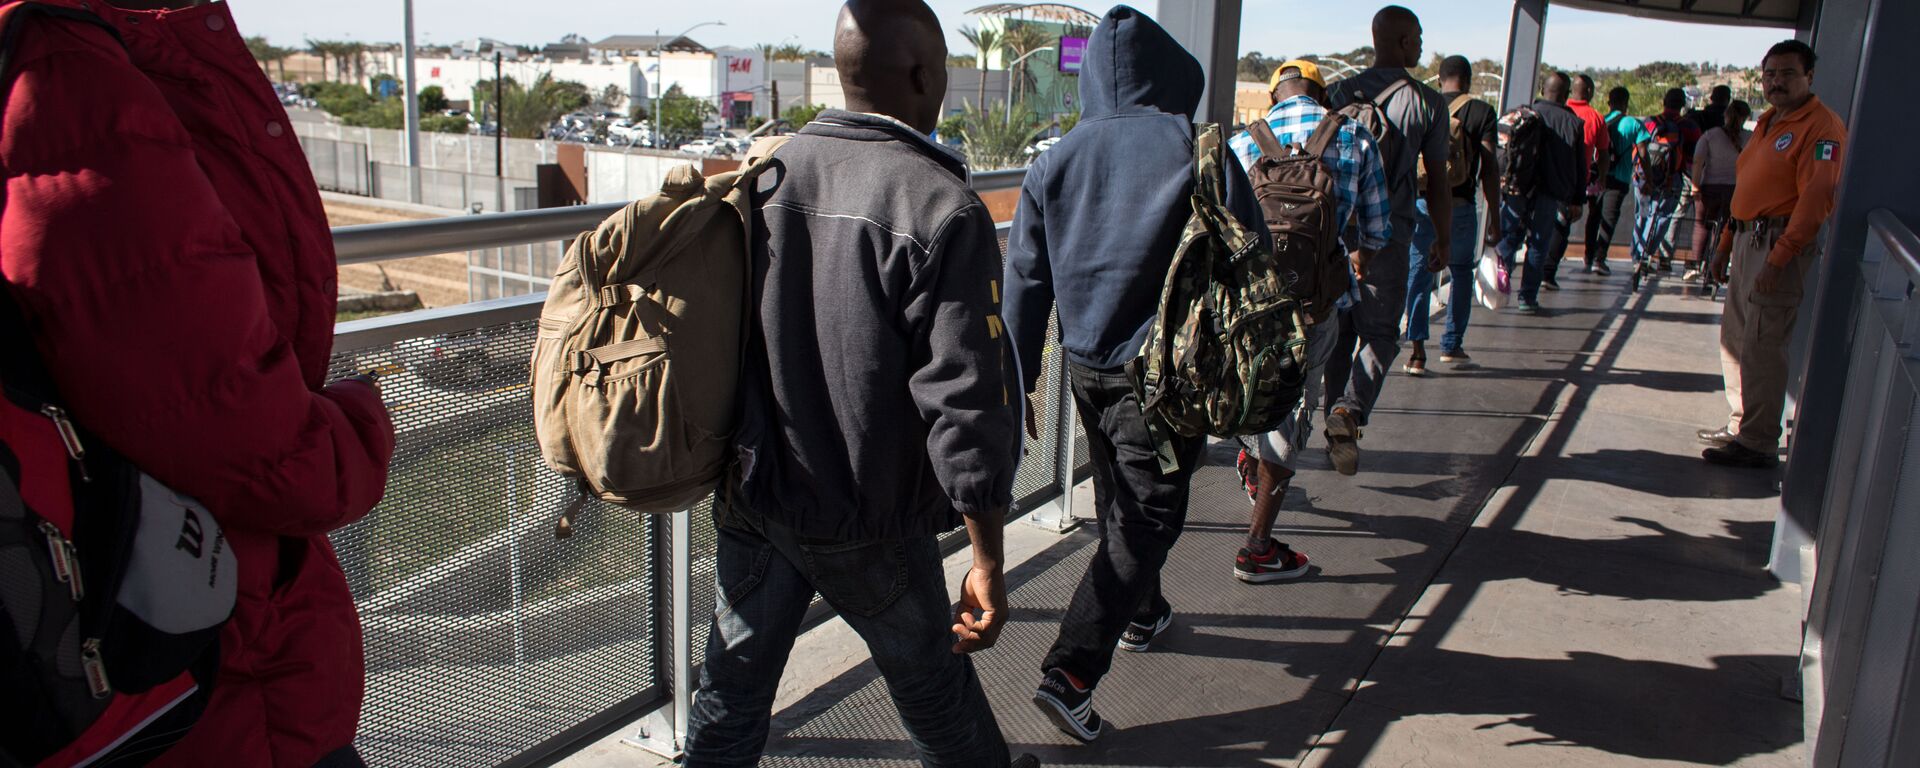 Haitian migrants seeking asylum in the United States, queue at El Chaparral border crossing in the hope of getting an appointment with US migration authorities, in the Mexican border city of Tijuana, in Baja California, on October 7, 2016 - Sputnik International, 1920, 08.03.2021